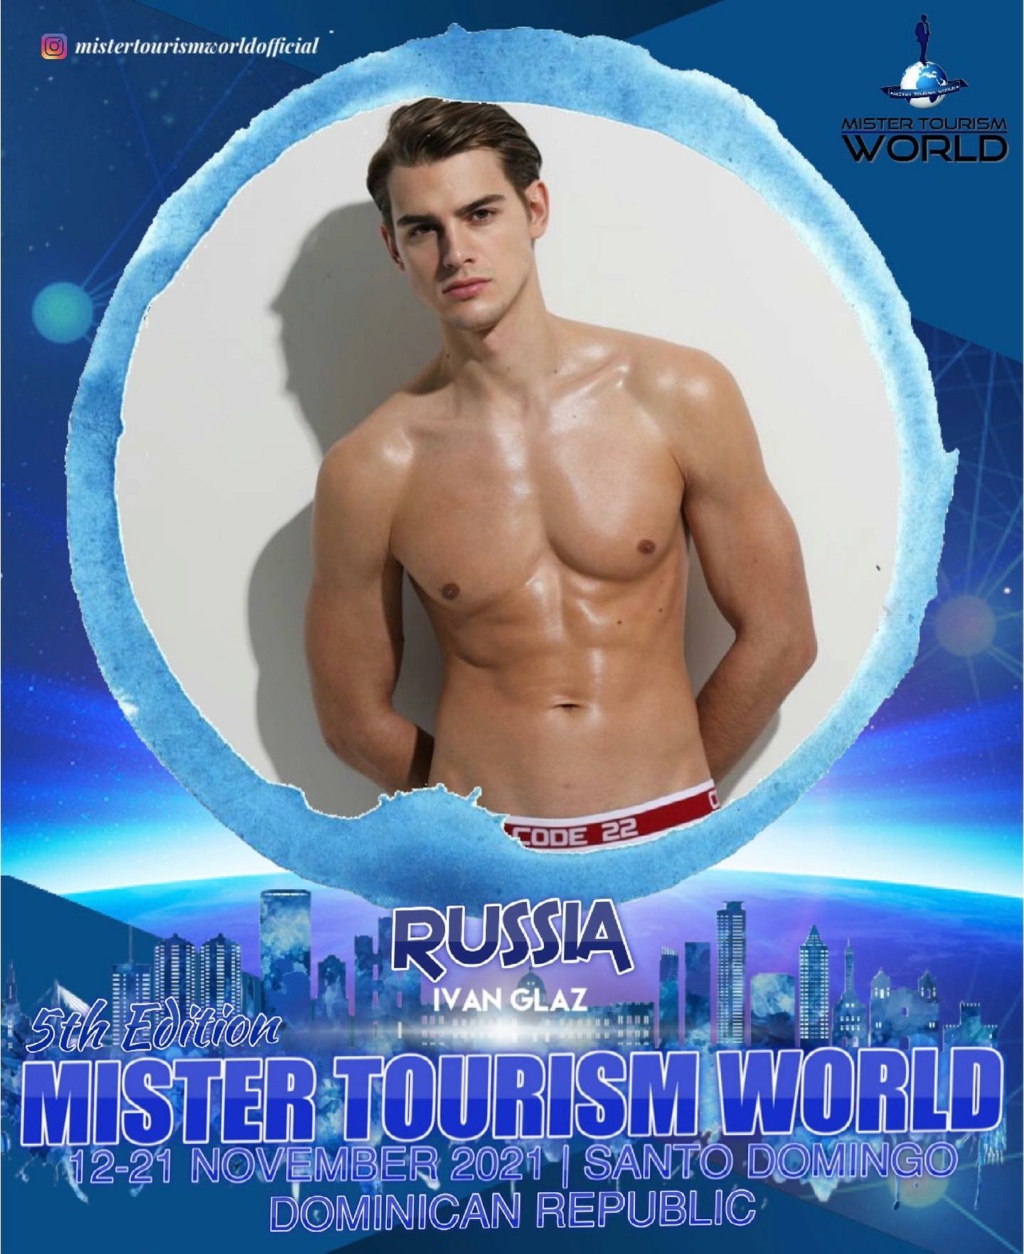 5th Mister Tourism World 2020/2021 is Dominican Republic 19951410